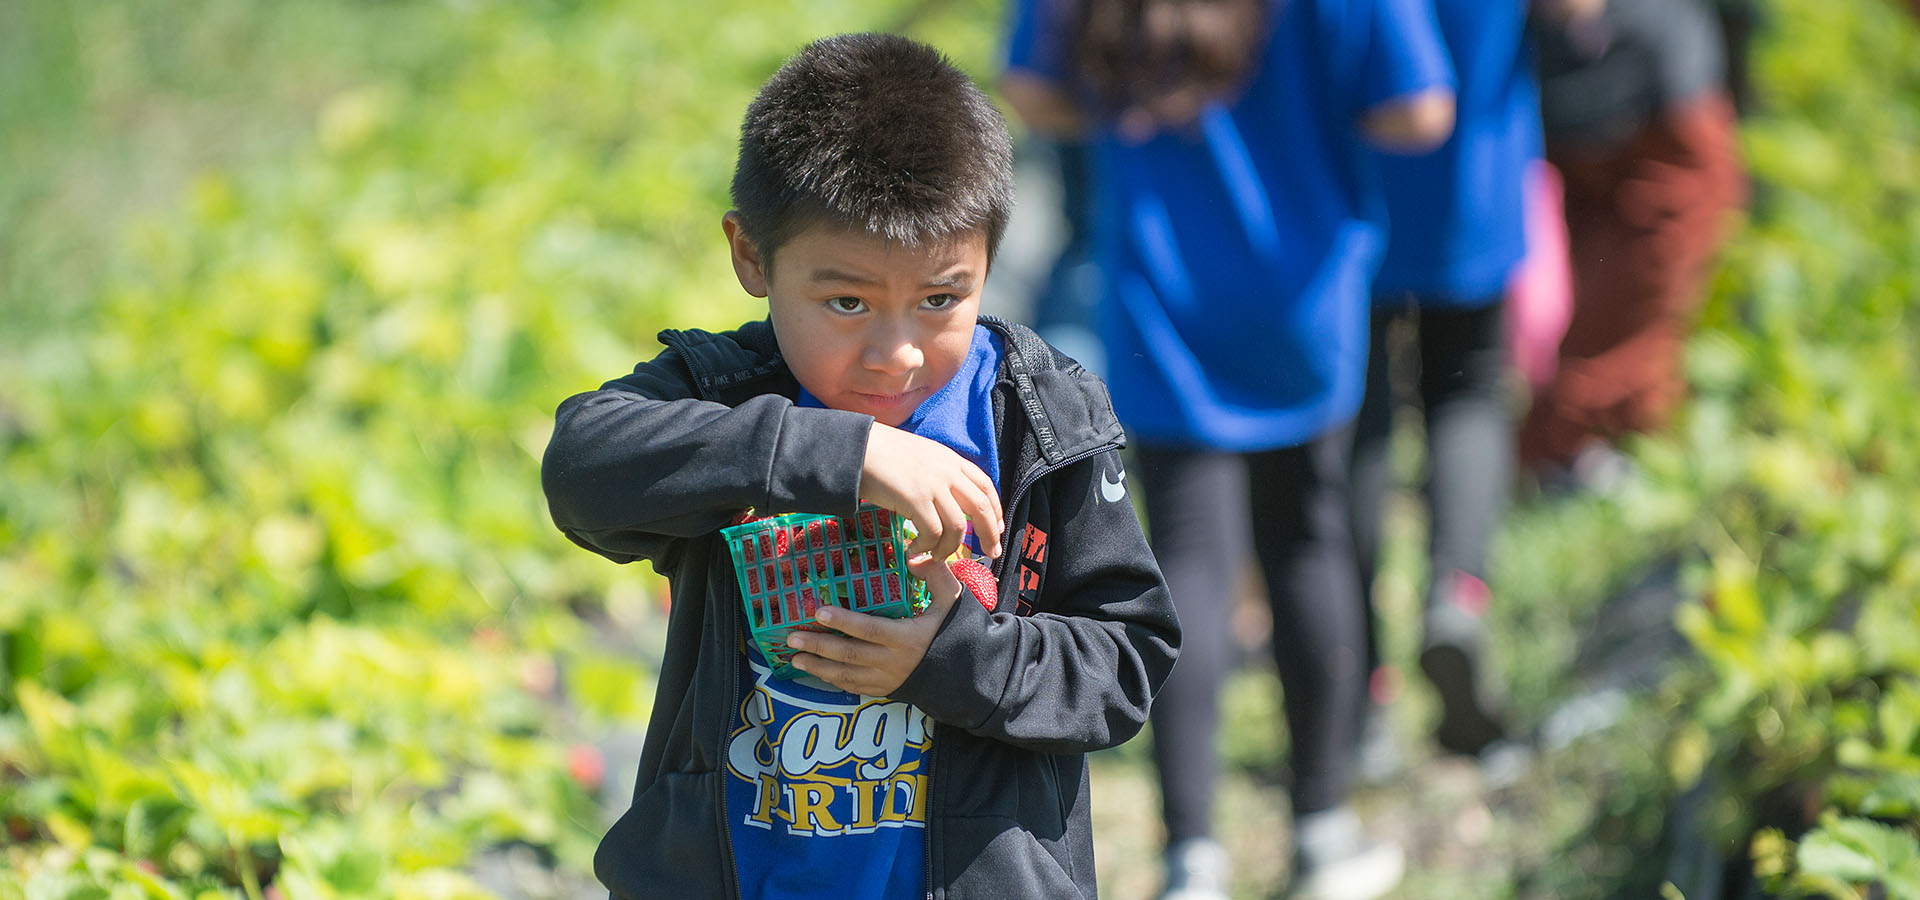 A boy carries a basket of strawberries picked from the field.